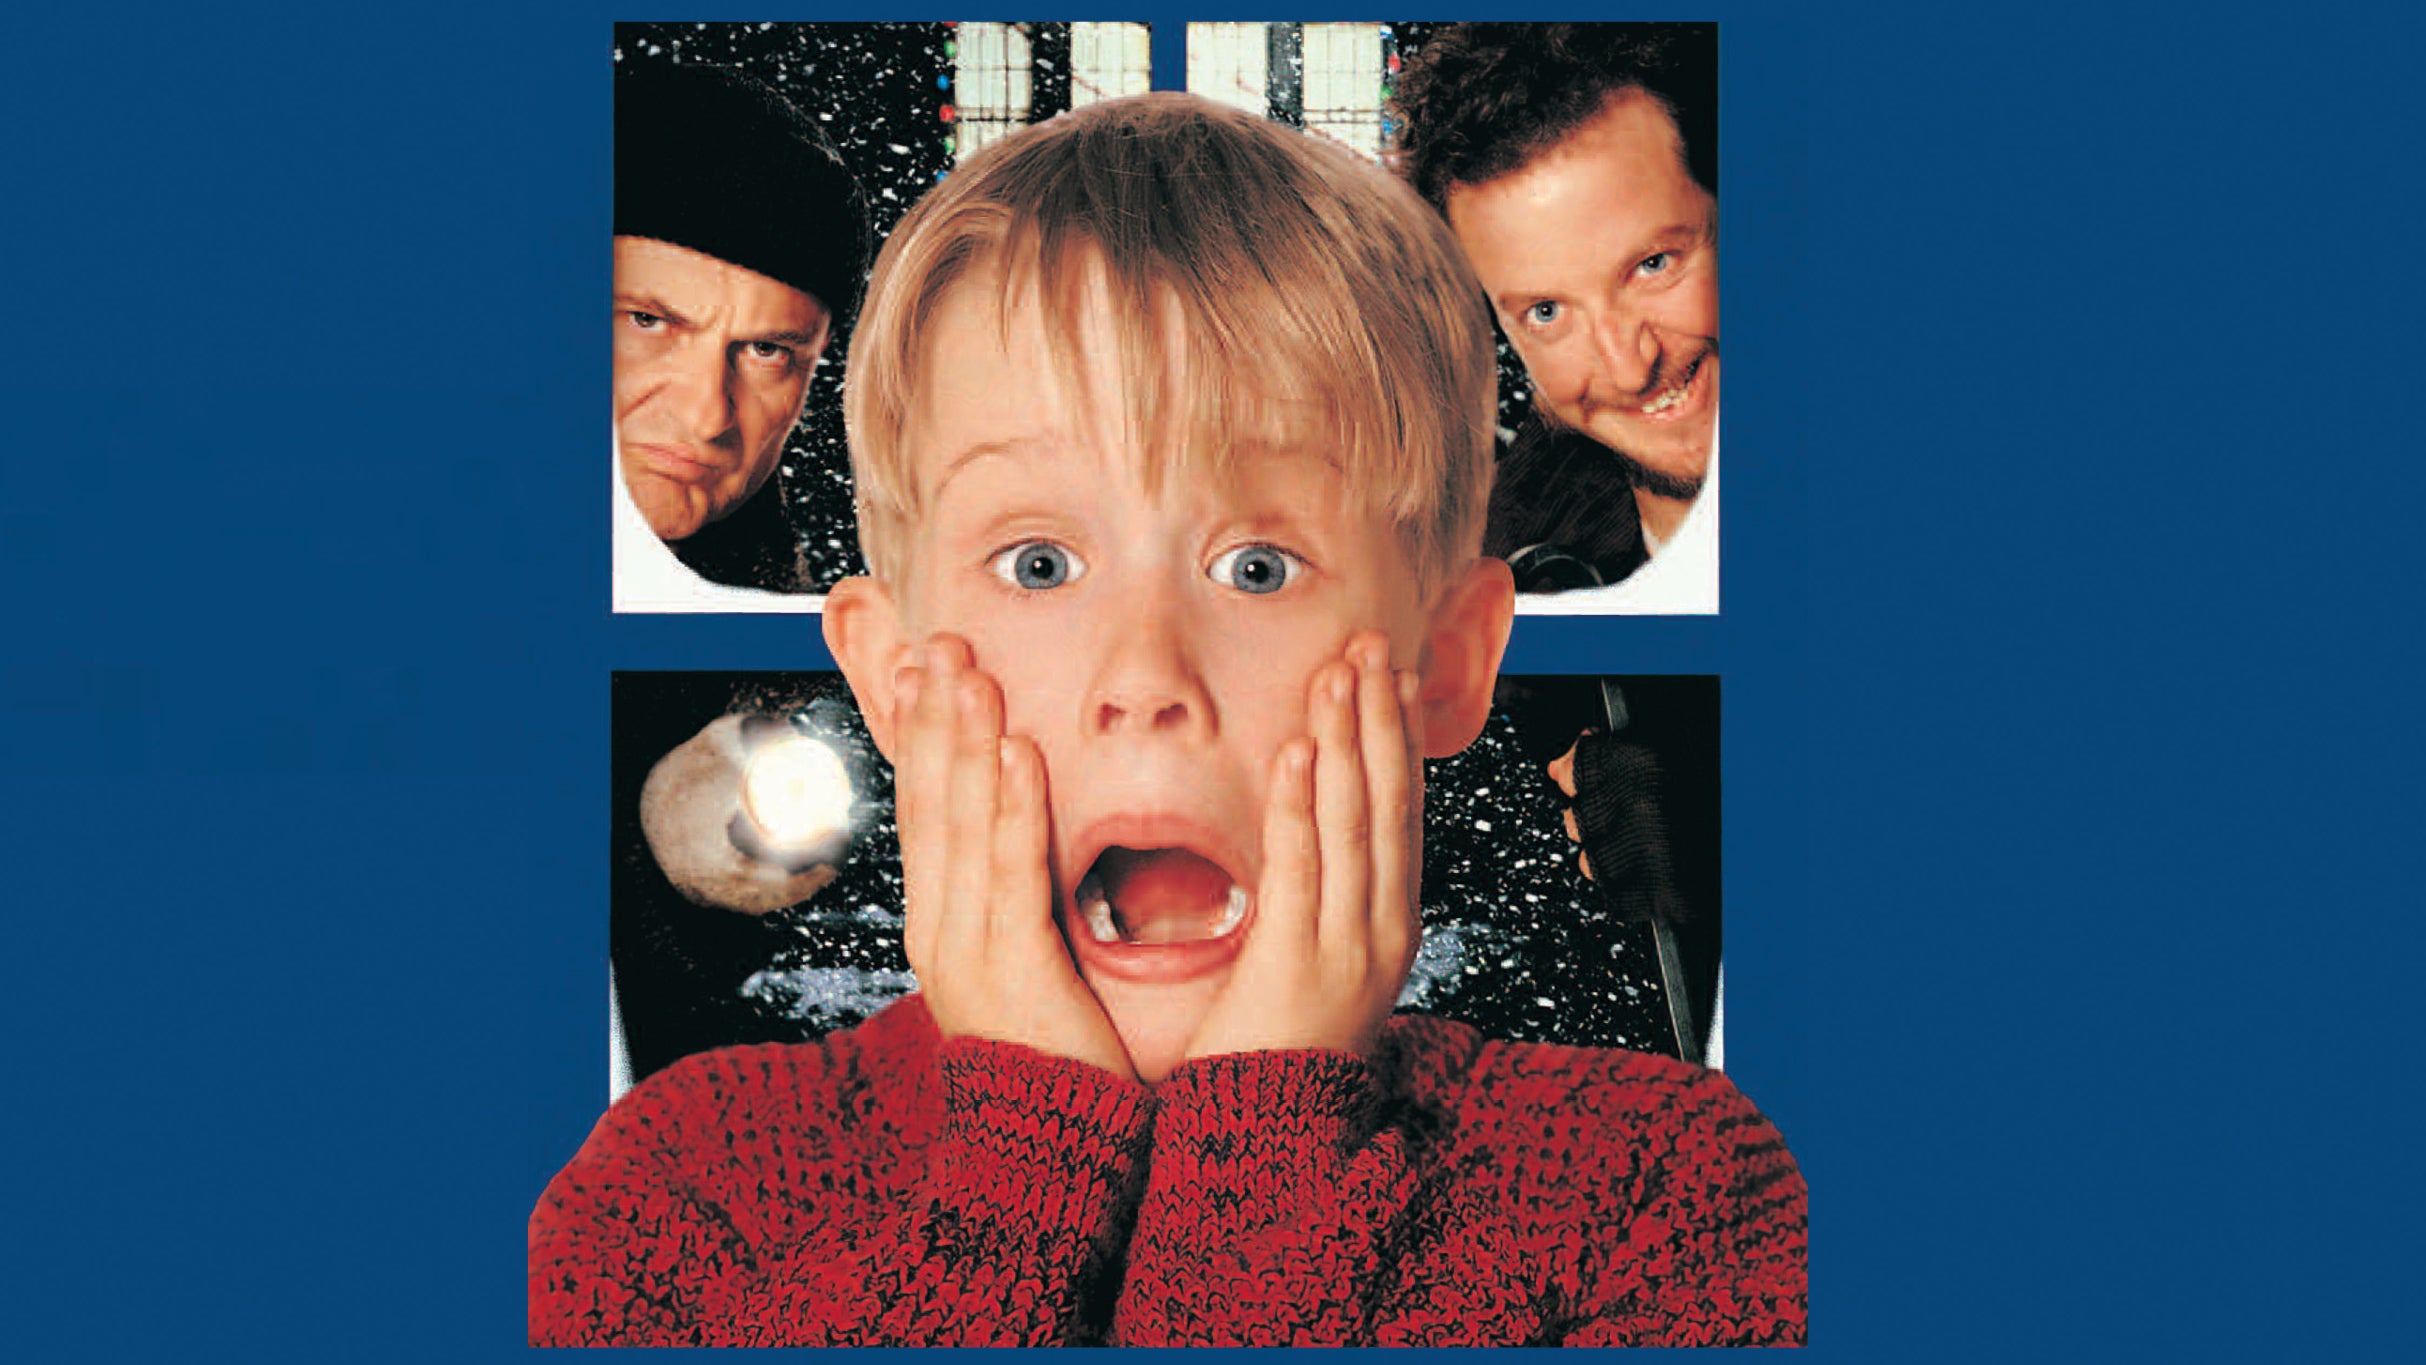 Home Alone in Concert in Leeds promo photo for Venue presale offer code